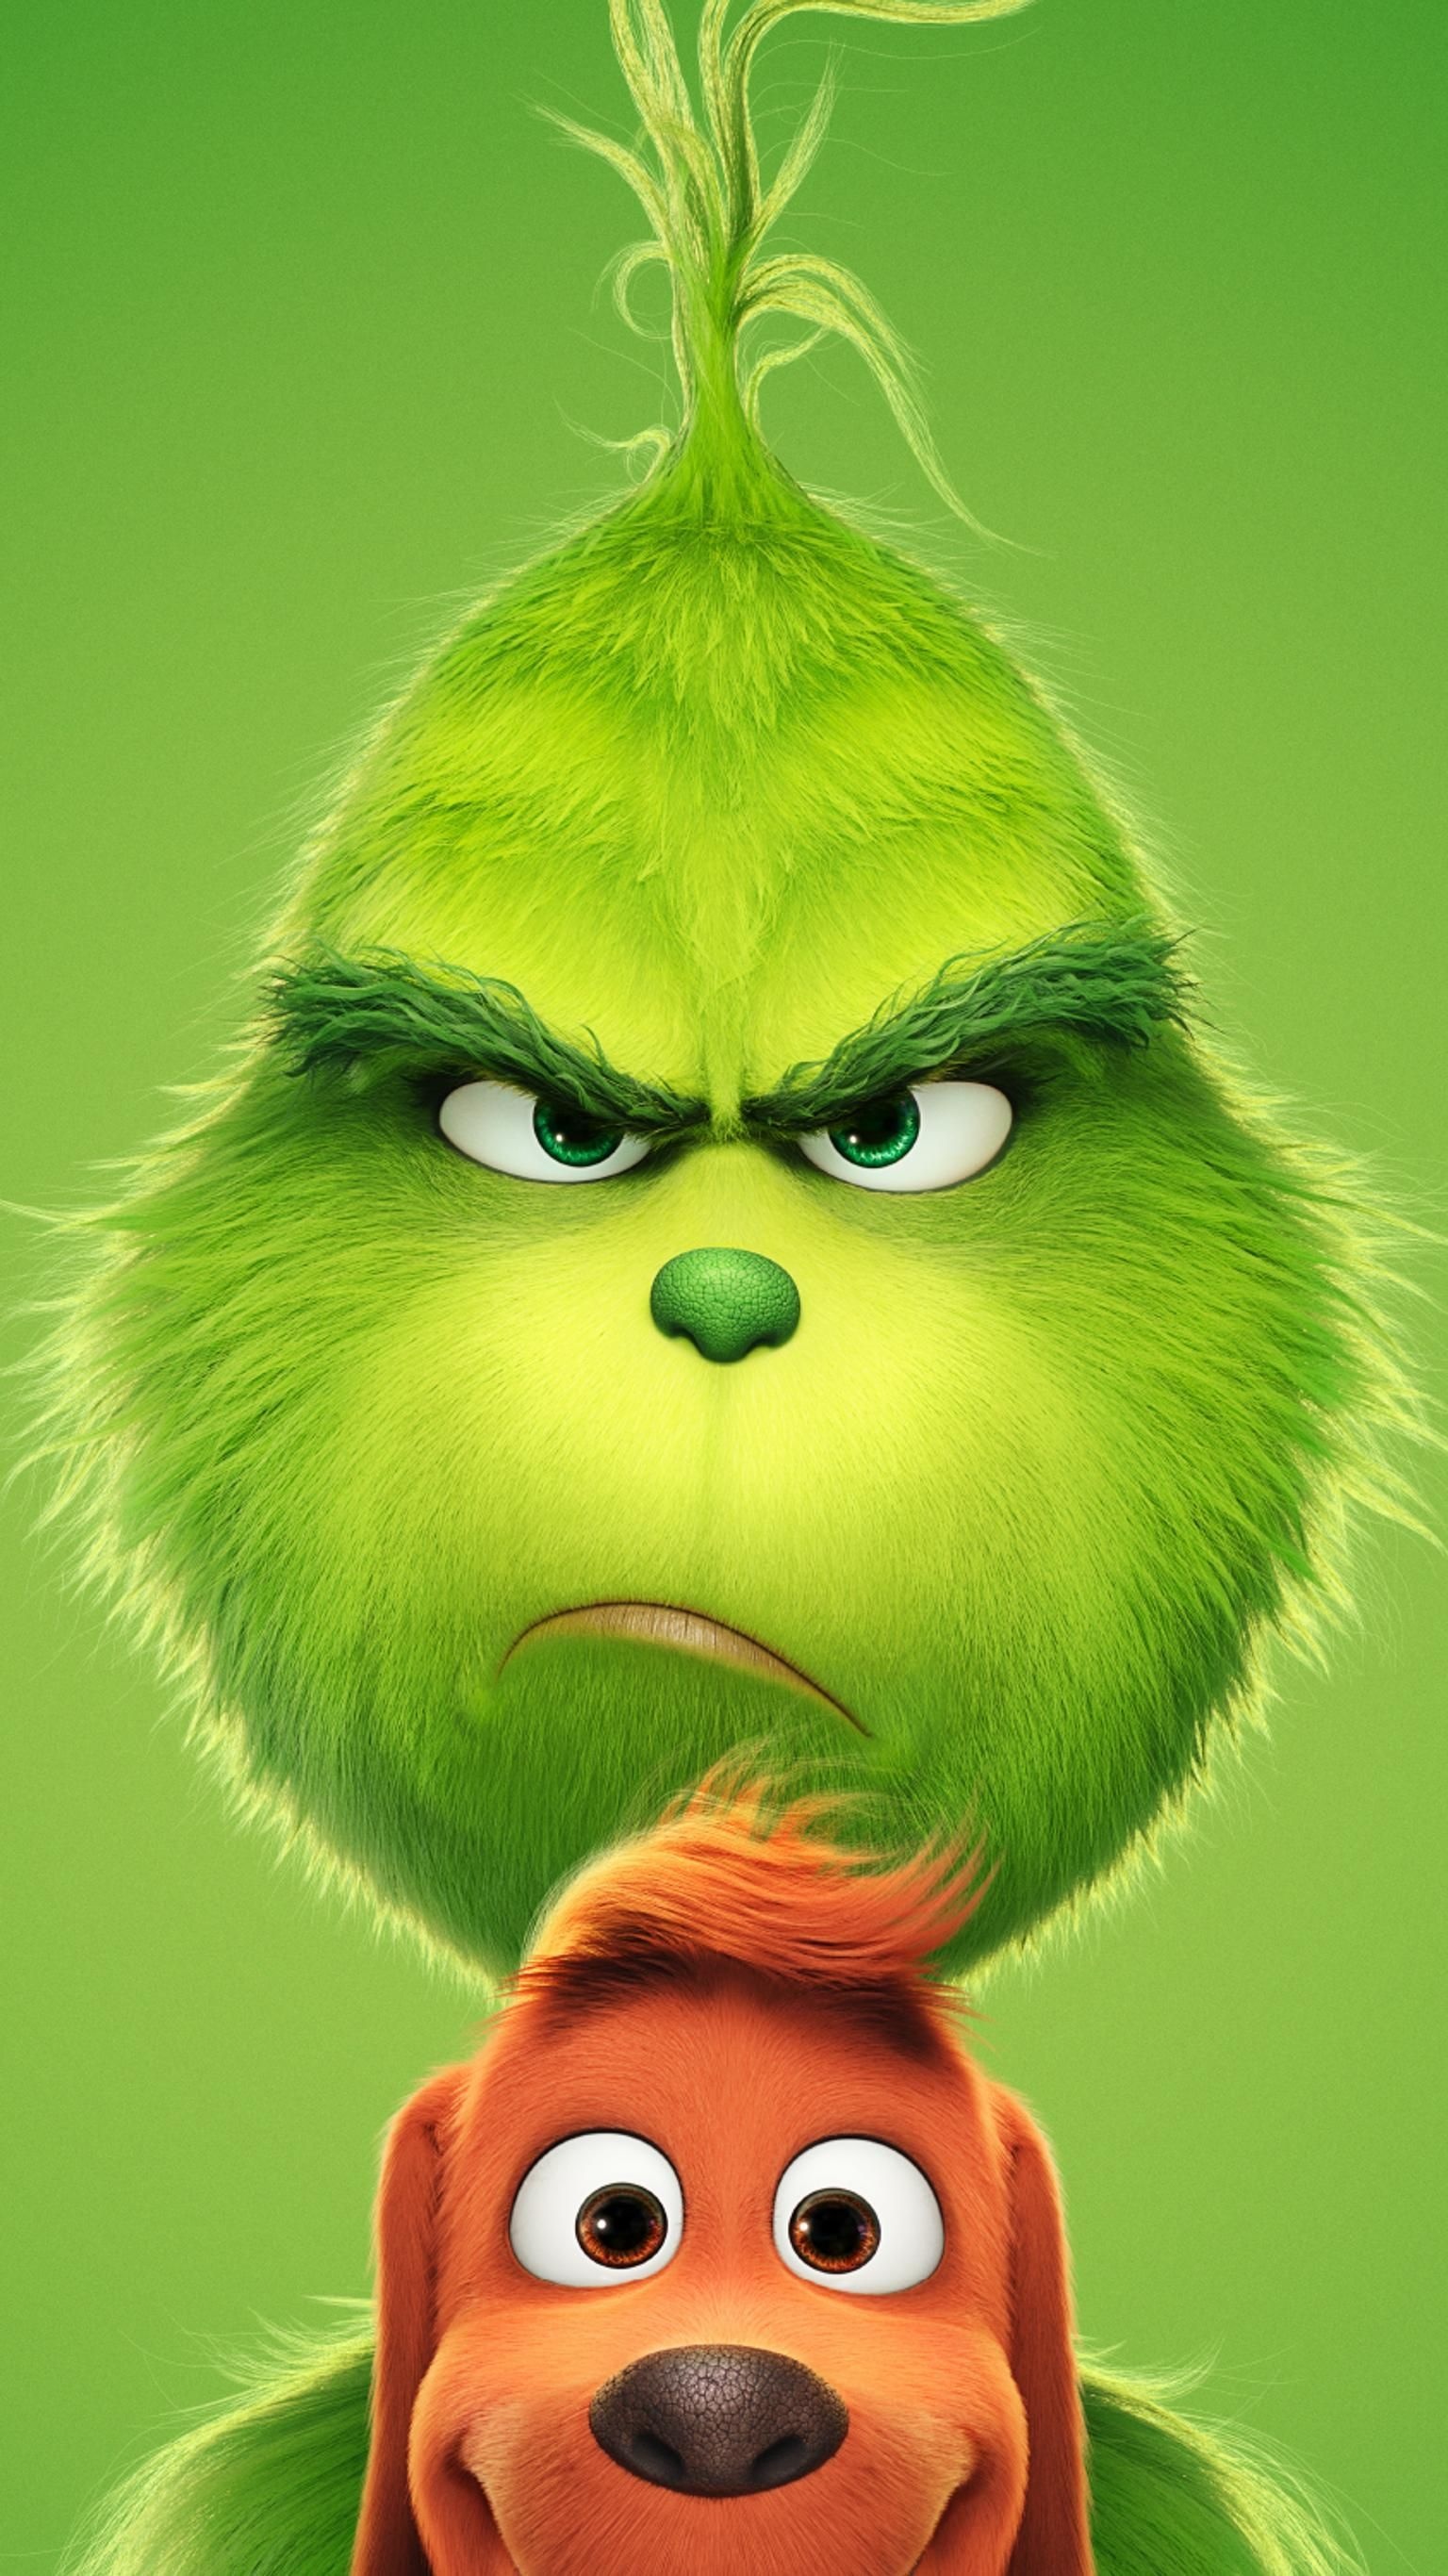 The Grinch wallpapers, Top choices, Festive backgrounds, Christmas joy, 1540x2740 HD Phone